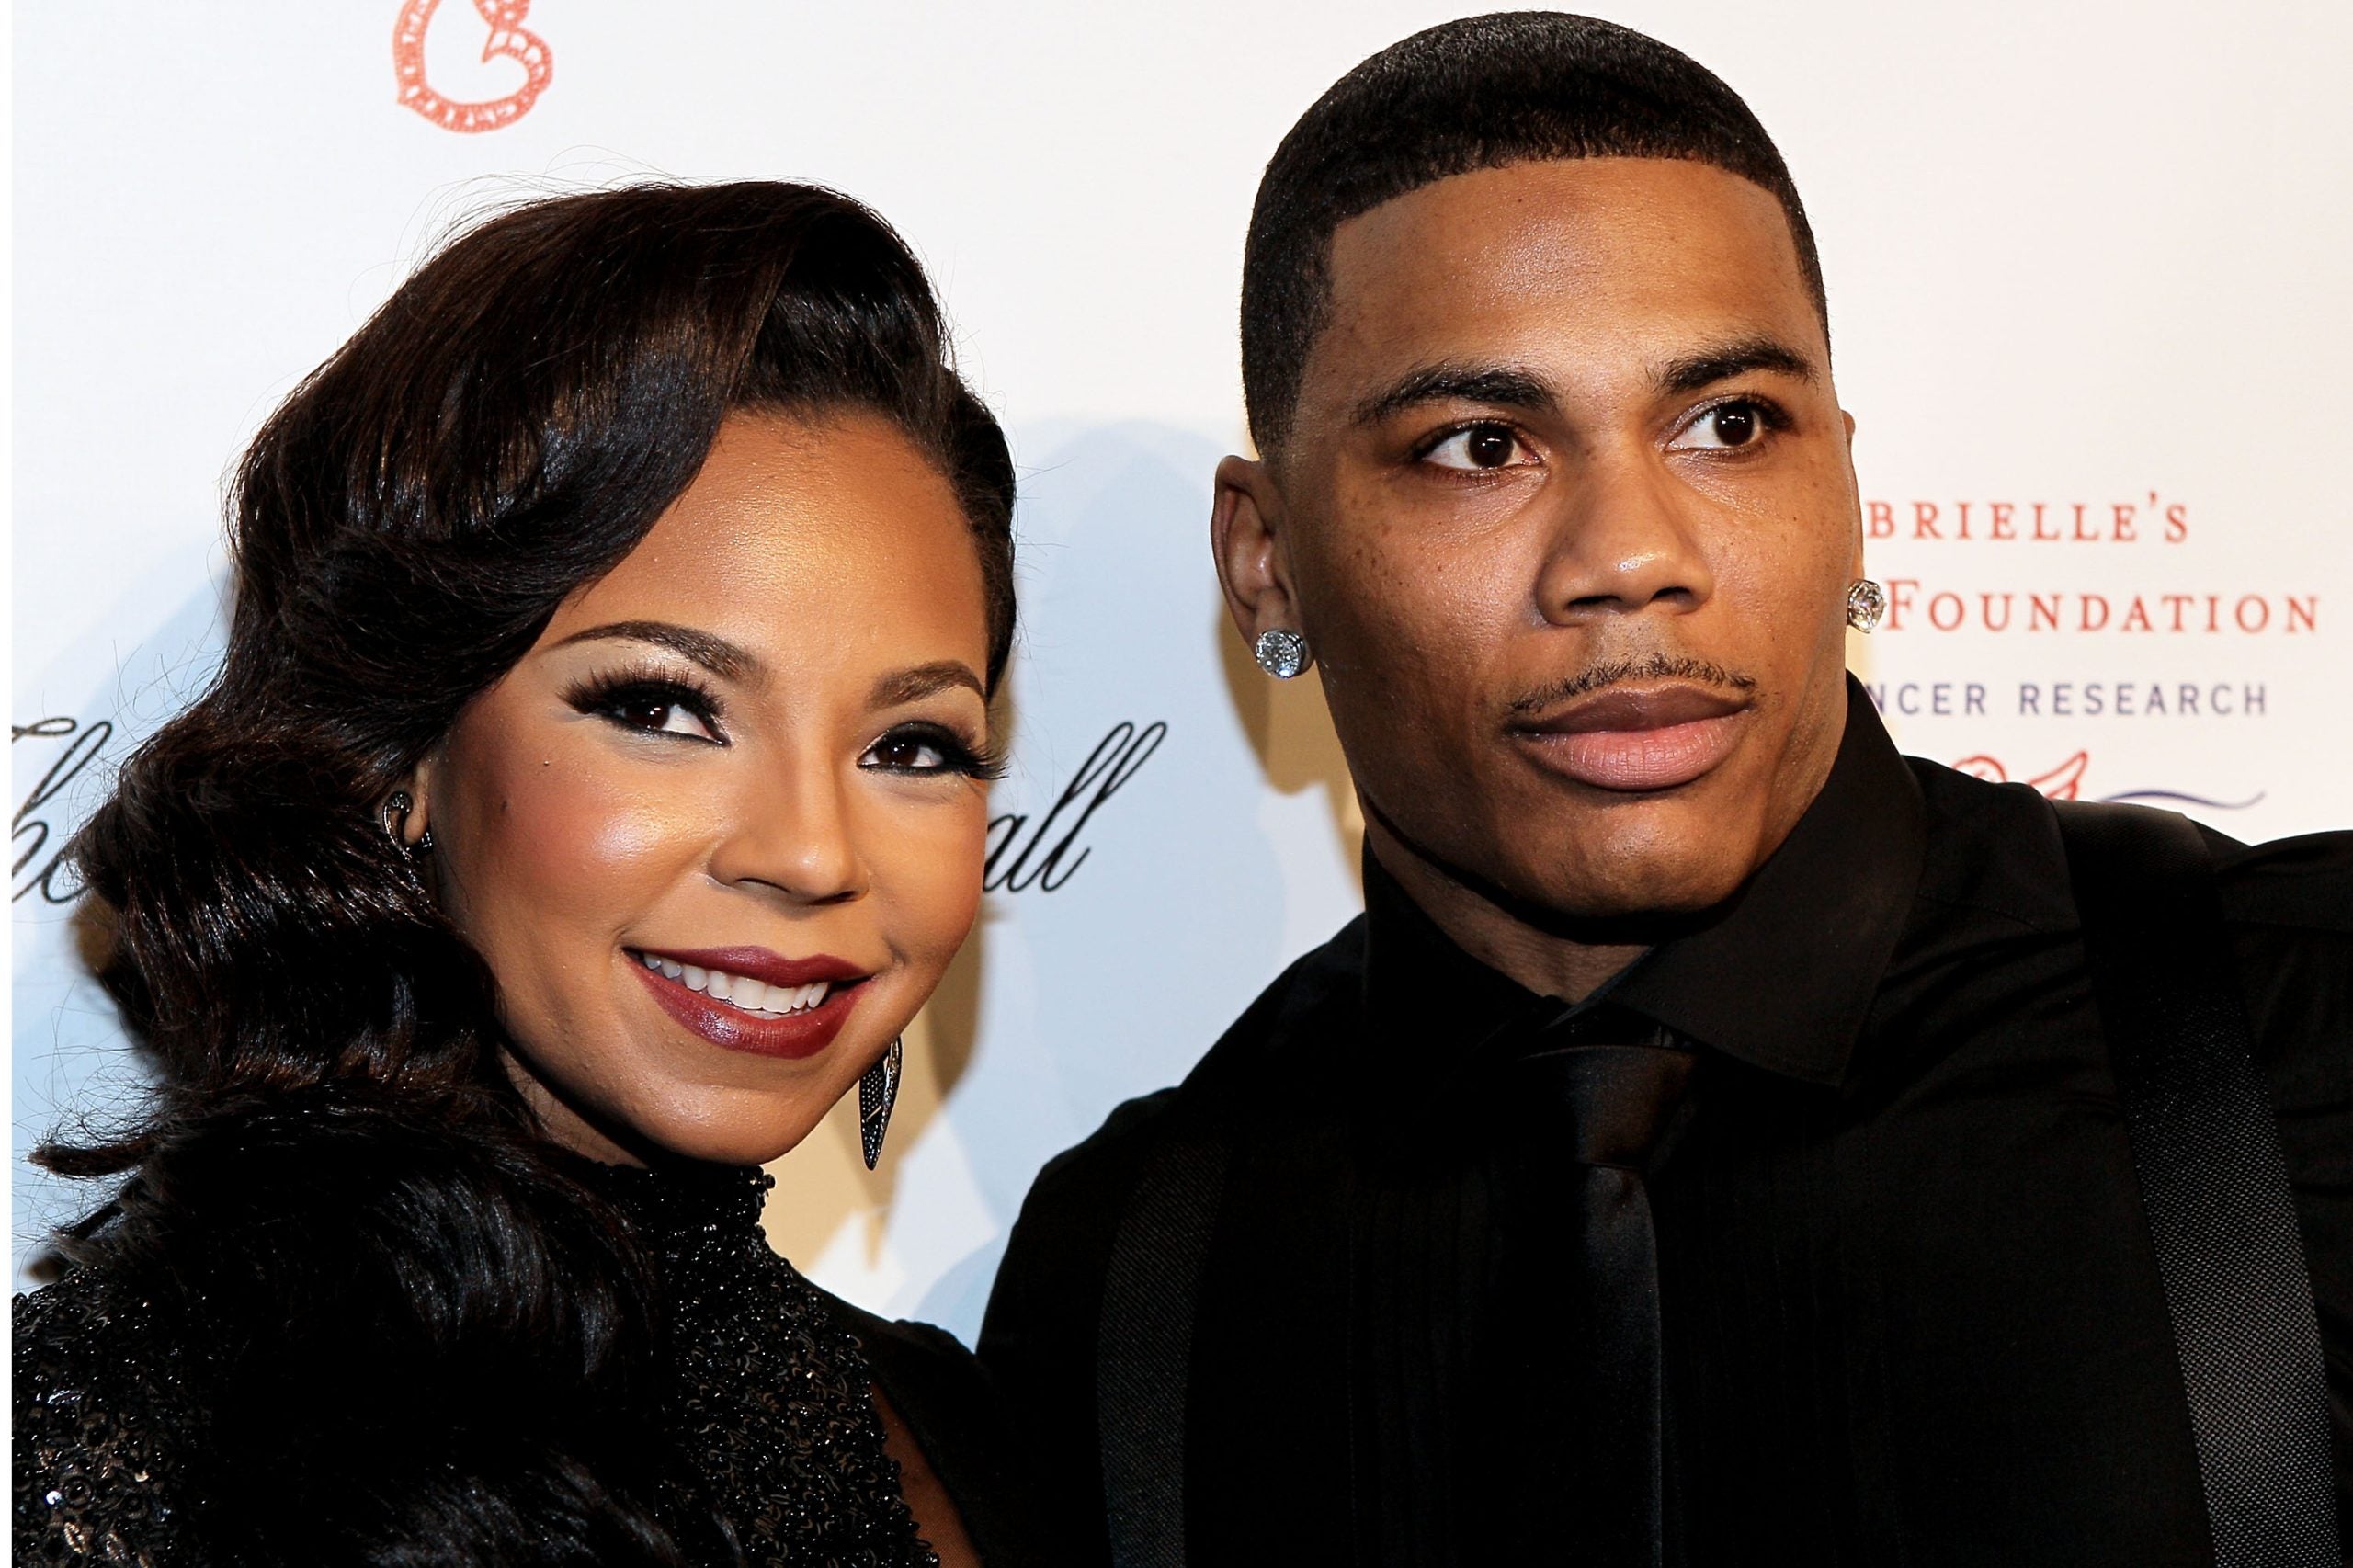 Ashanti Says Her And Nelly Are 'In A Better Place’ Following Their Recent Performance 